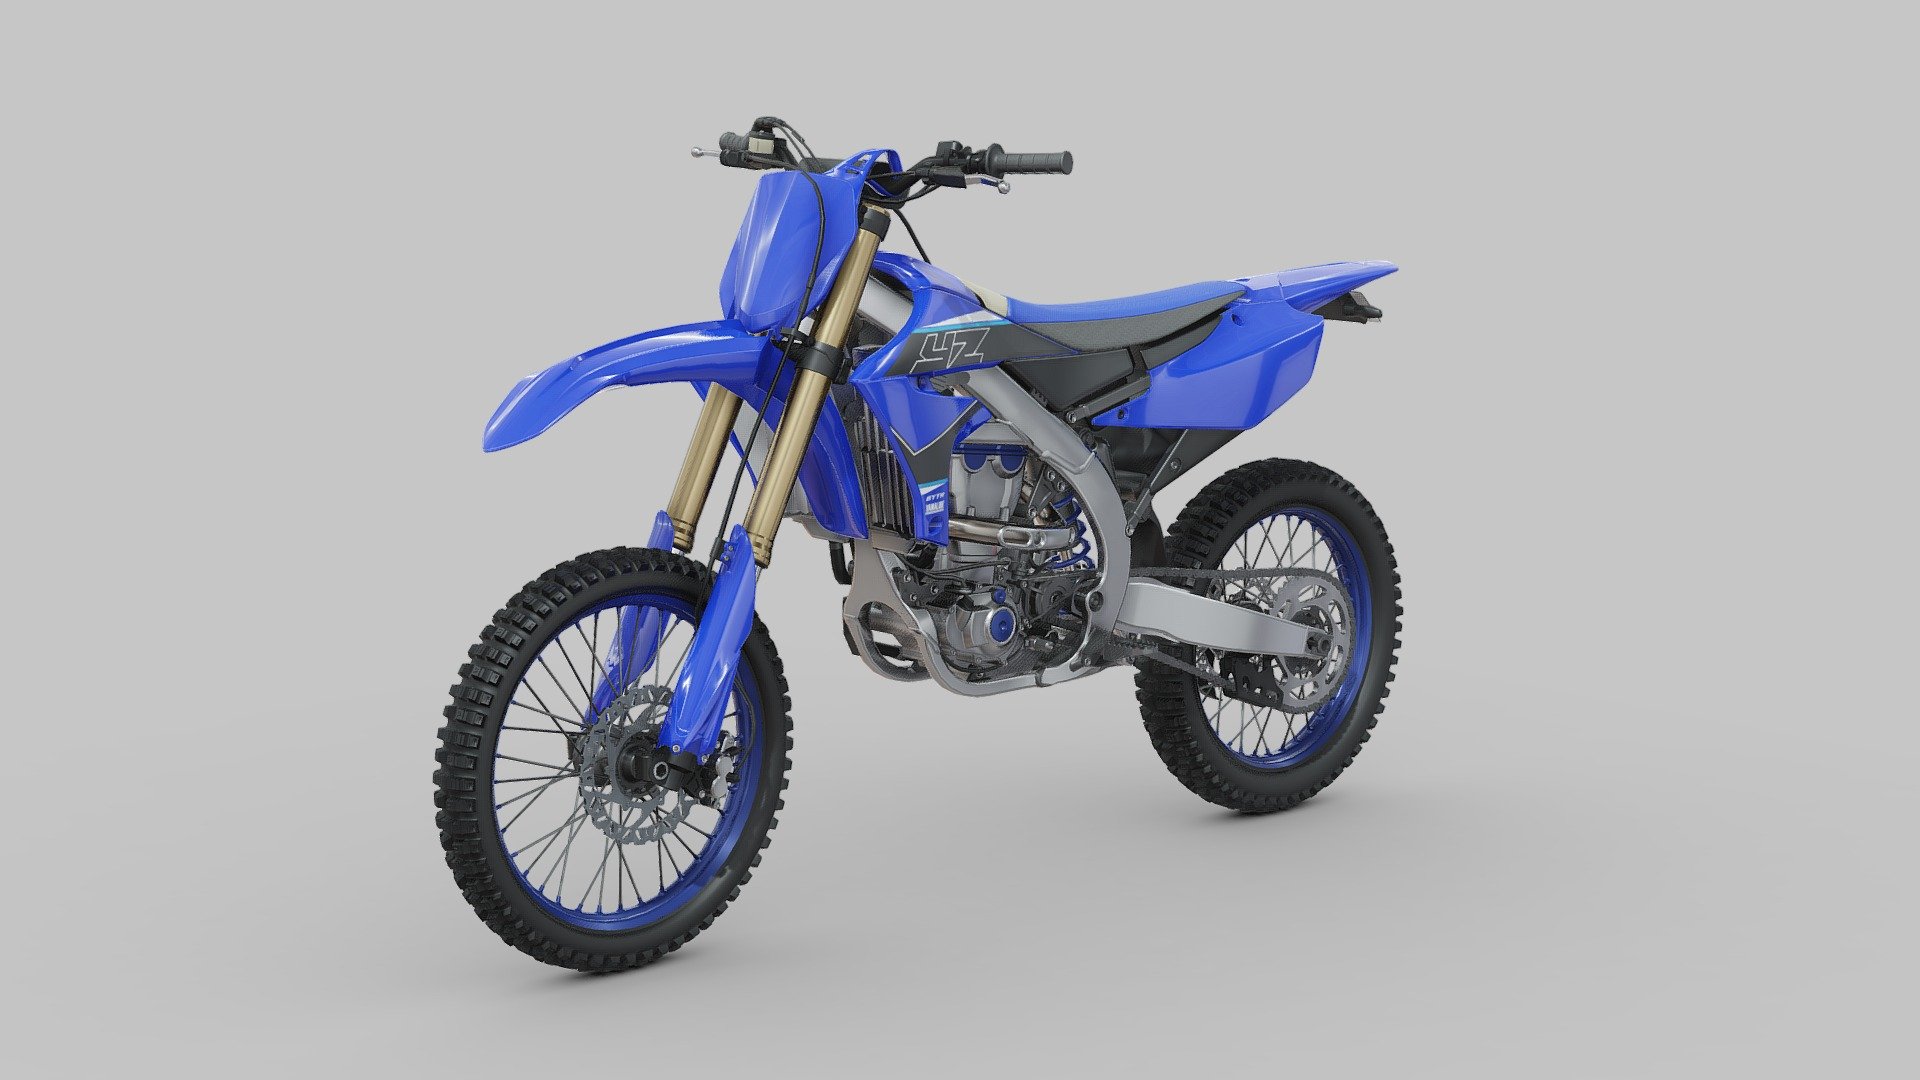 The Yamaha YZ450F is a legendary motocross motorcycle renowned for its championship-winning performance and cutting-edge technology. Representing the pinnacle of Yamaha's off-road engineering prowess, the YZ450F is designed to dominate the dirt with its potent combination of power, agility, and durability. At the heart of the YZ450F is a high-performance 450cc liquid-cooled, four-stroke engine, meticulously engineered to deliver explosive acceleration and relentless torque across the rev range. Equipped with advanced fuel injection and a lightweight chassis, the YZ450F offers razor-sharp handling and precise control, allowing riders to conquer even the most challenging terrain with confidence. Whether tearing up the track or navigating rugged trails, the Yamaha YZ450F delivers championship-winning performance and unmatched reliability, making it the ultimate choice for serious motocross enthusiasts seeking the thrill of victory 3d model